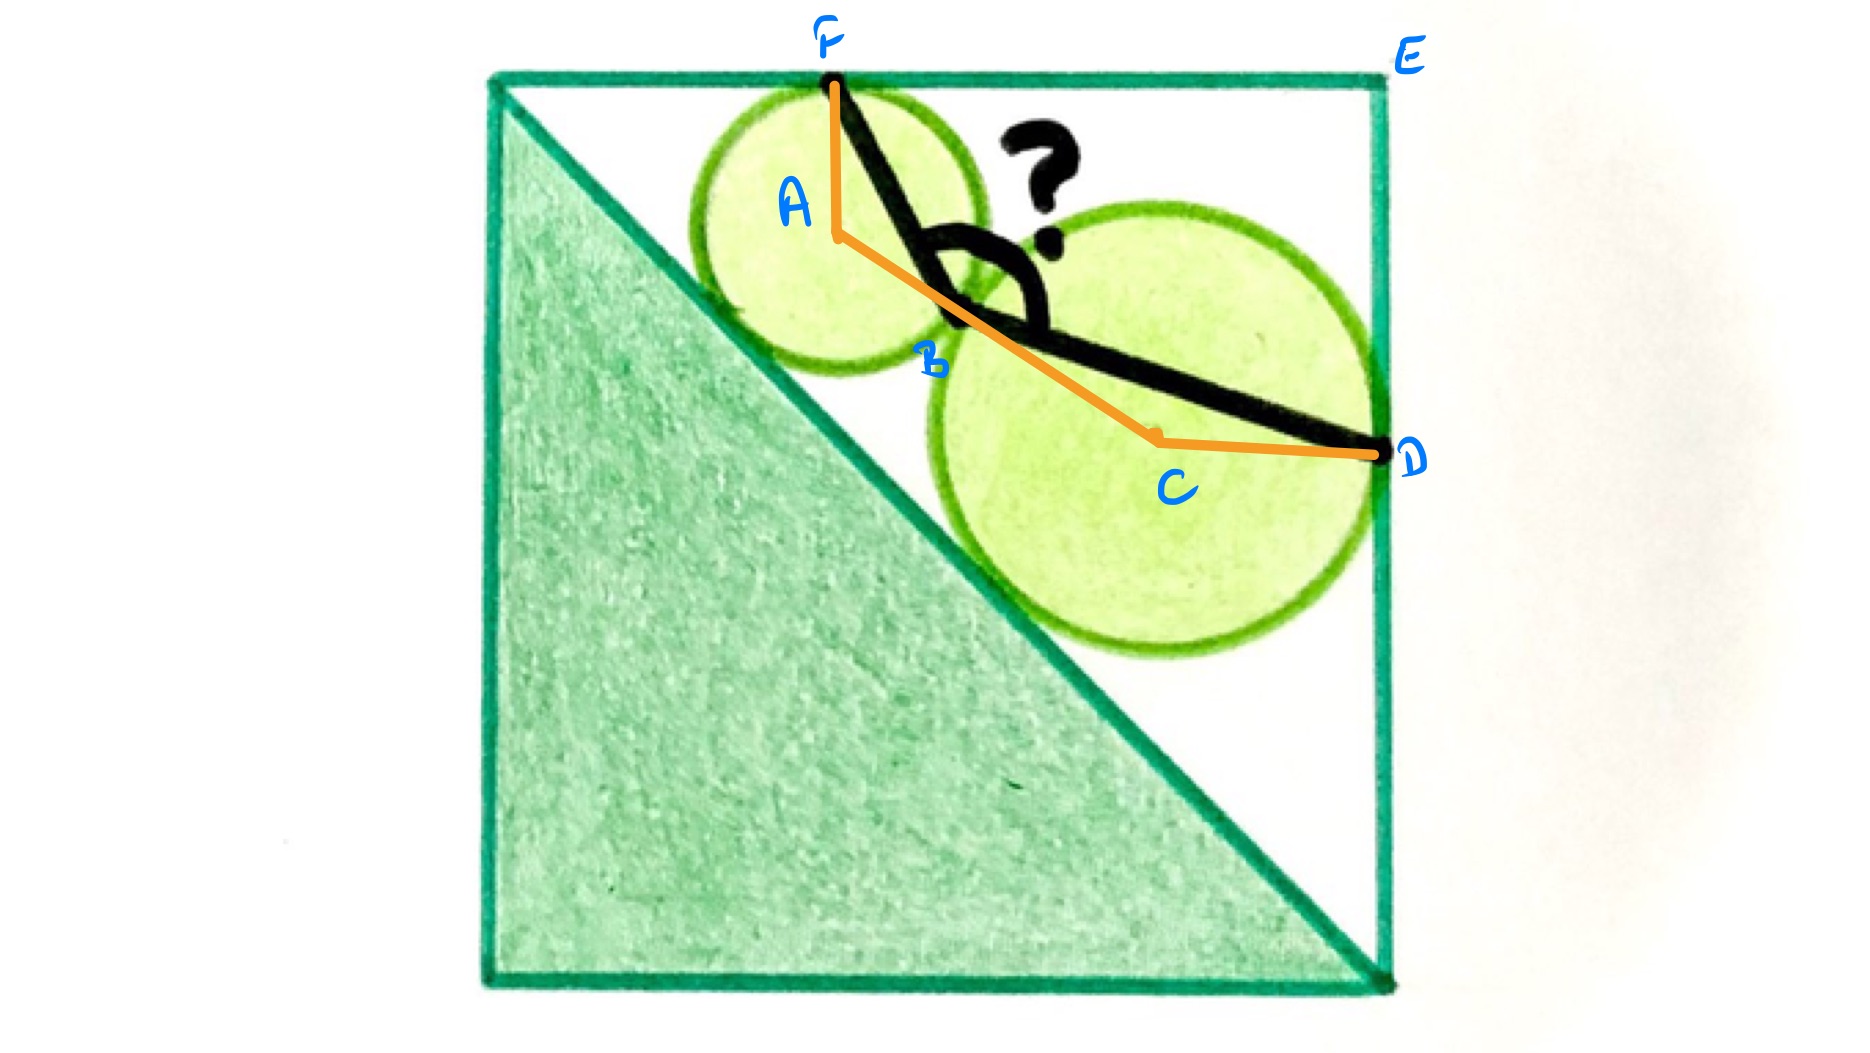 Two circles in a square II labelled